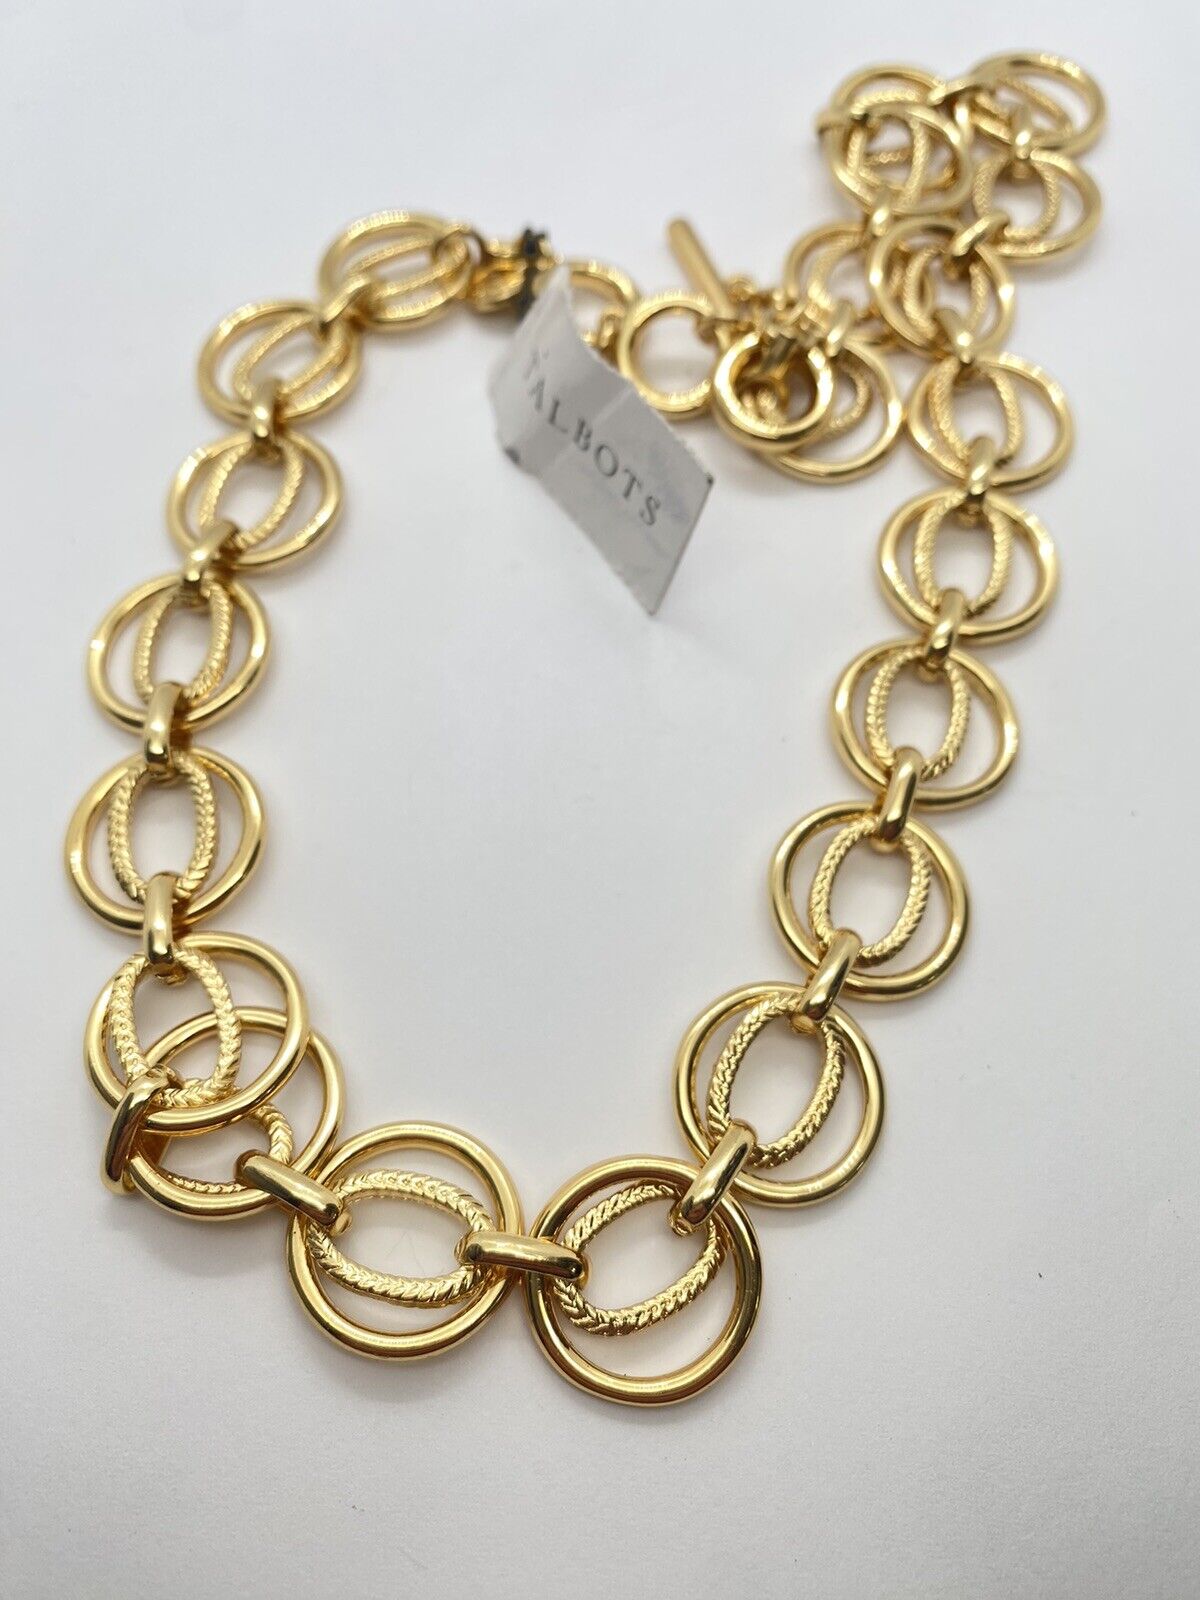 20” TALBOTS NEW WITH TAGS MULTI HOOP NECKLACE DESIGNER HIGH QUALITY